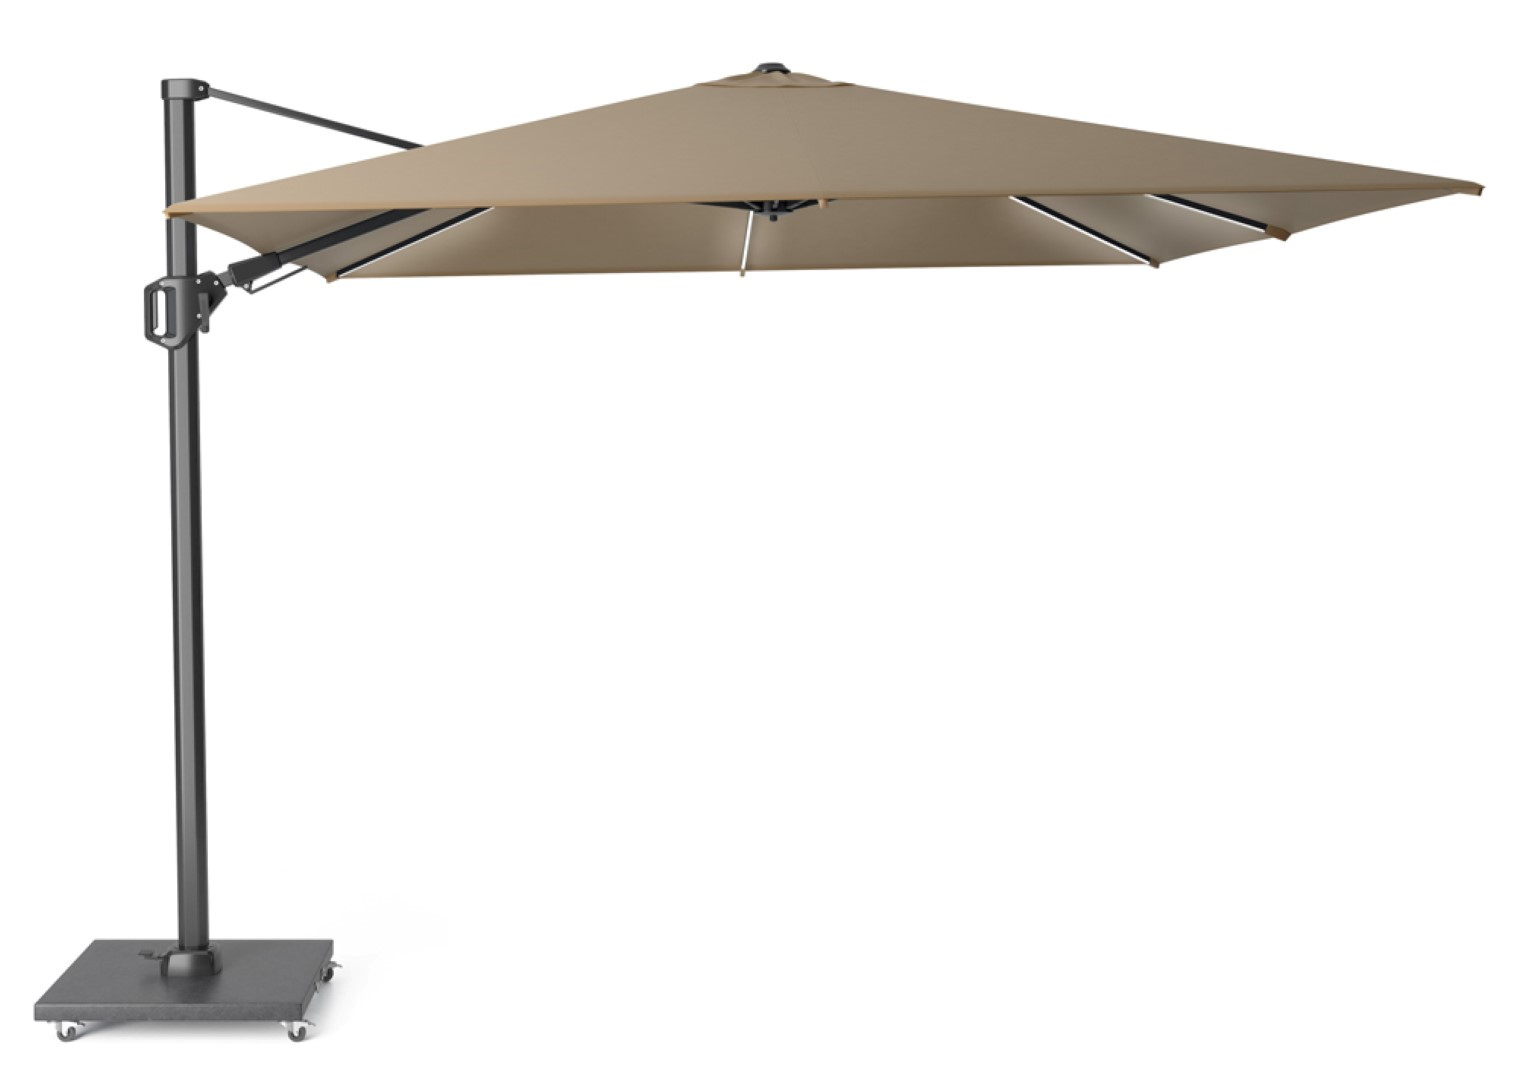 Challenger T2 Glow 300x300 cm taupe